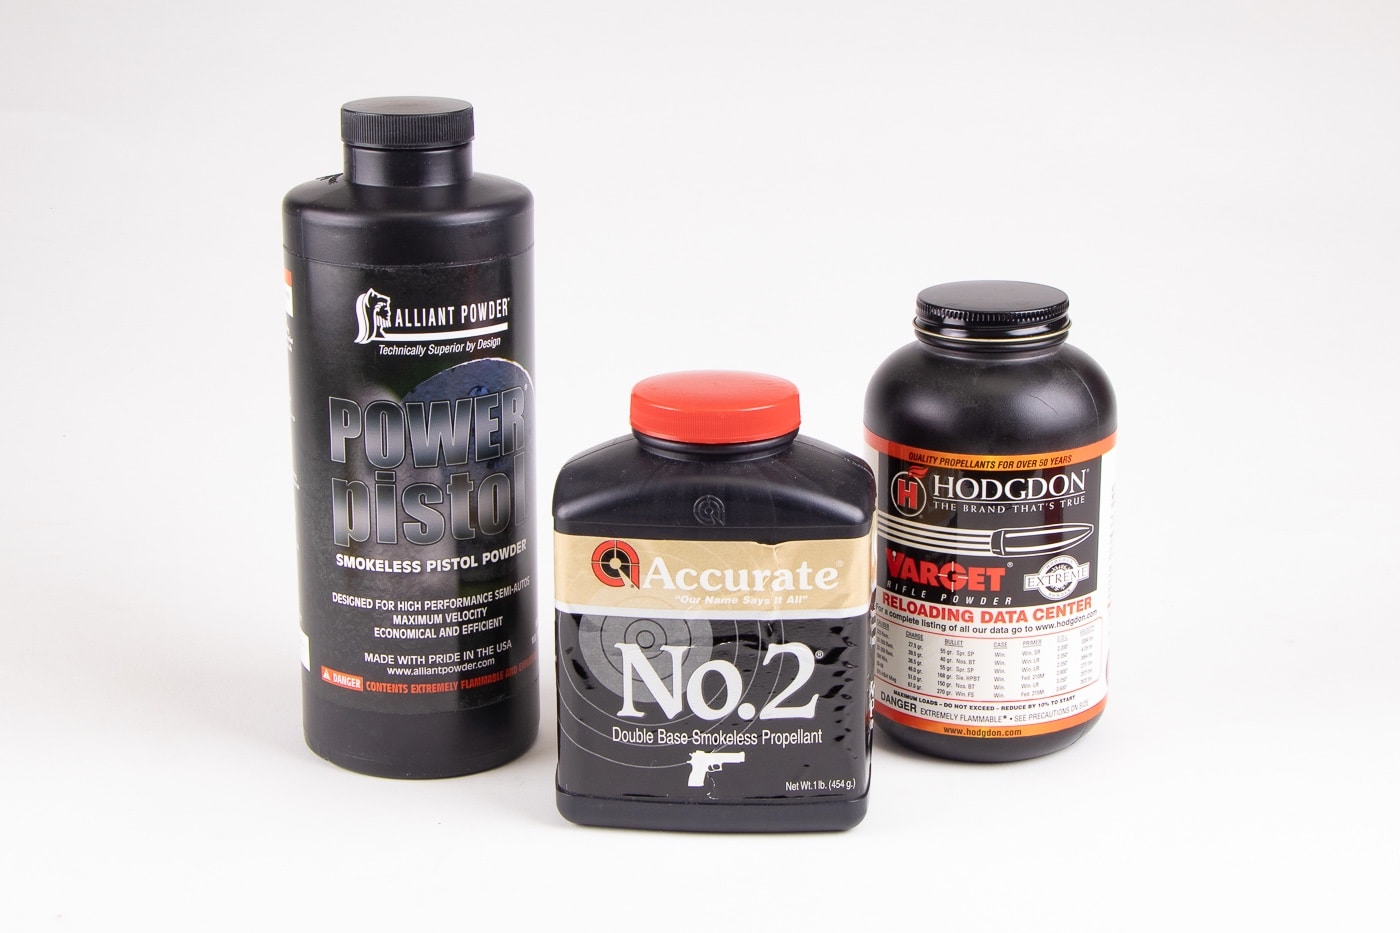 In this photograph, we see three different bottles of smokeless powder developed for handgun cartridges. We see smokeless powder for reloading cartridges from Alliant Powder, Hodgdon and Accurate. Each formulation offers different benefits.